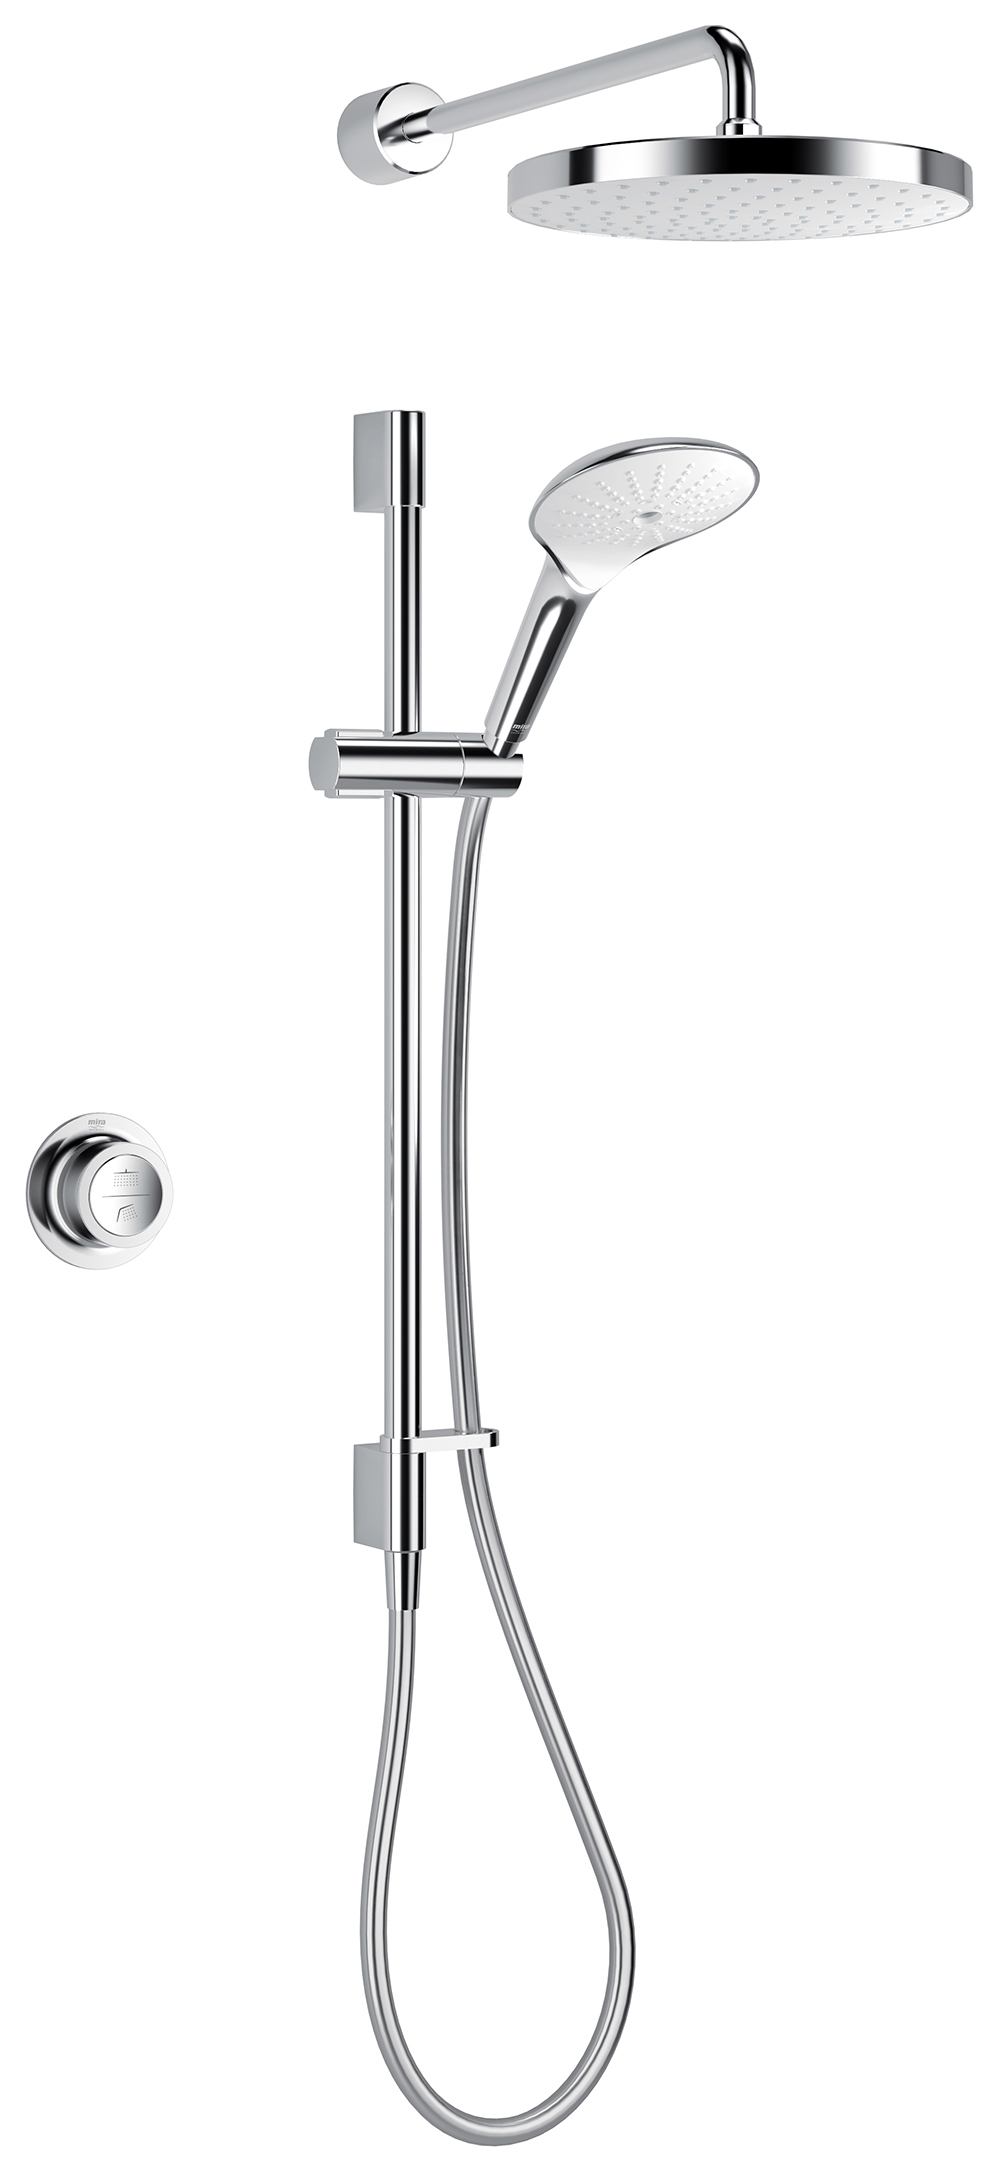 Image of Mira Mode Dual Outlet High Pressure Combi Rear Fed Digital Mixer Shower - Chrome